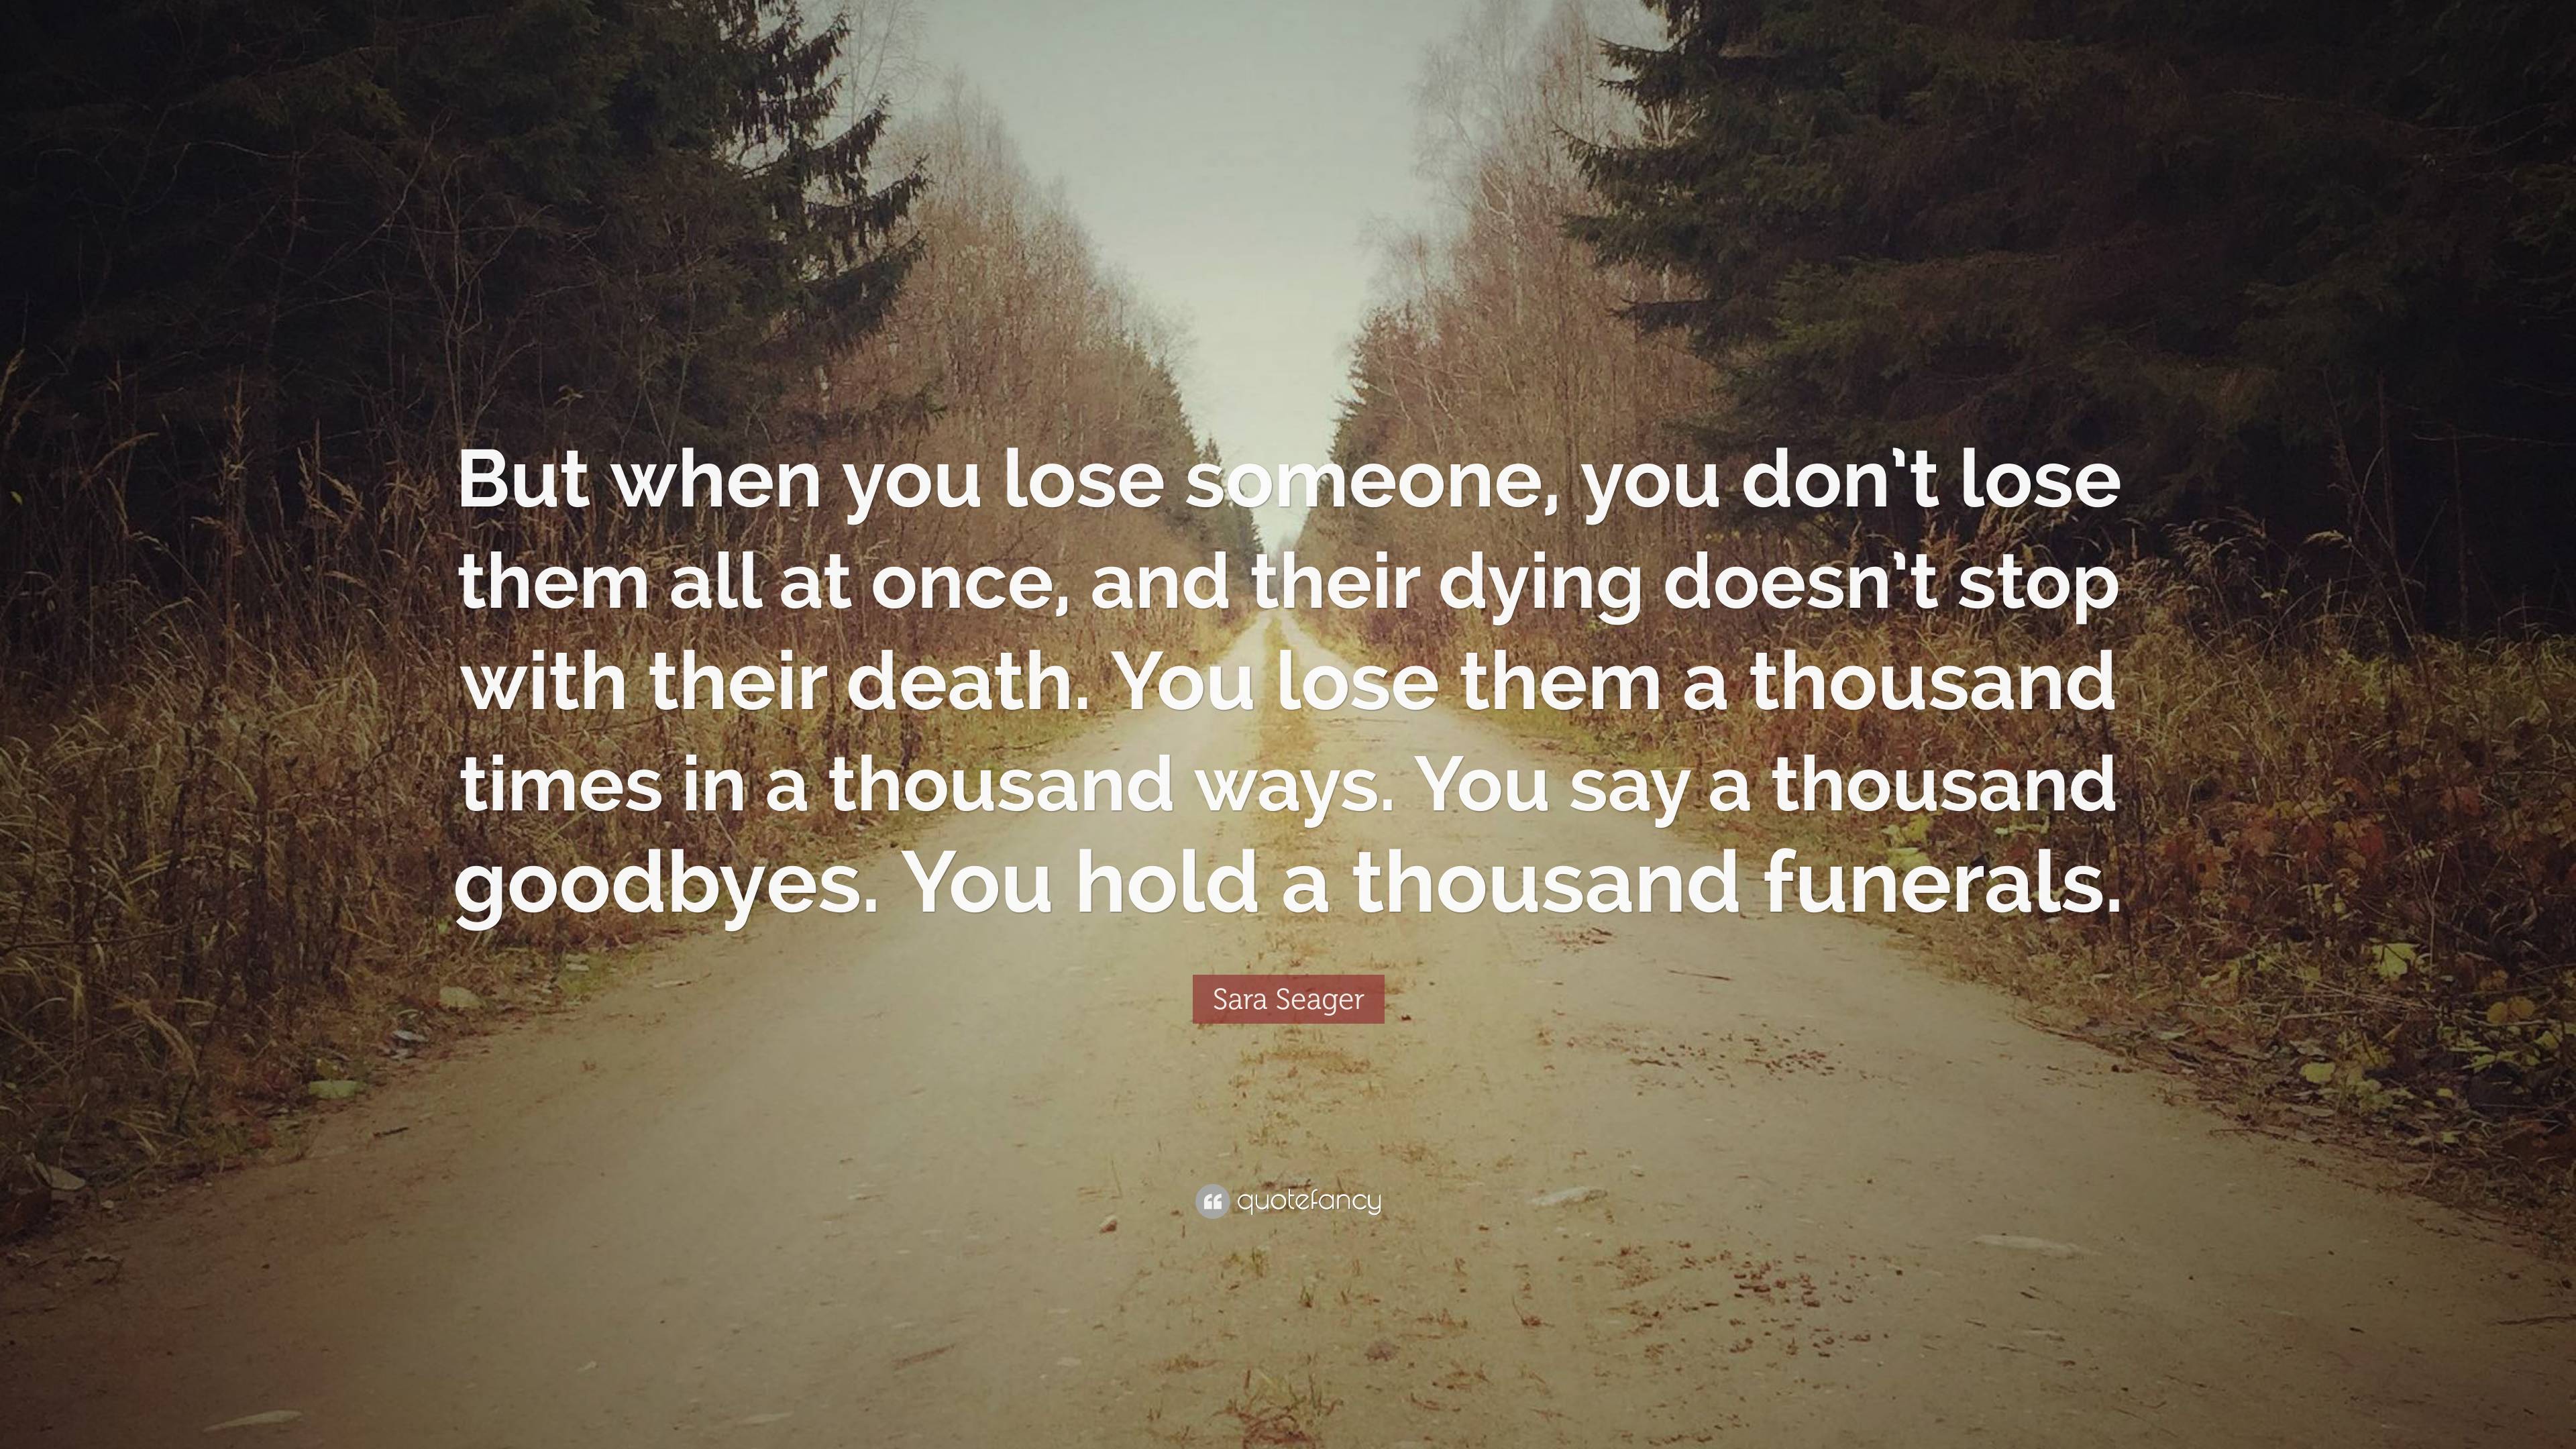 Why I Don't Say 'Passed Away' When Someone Dies